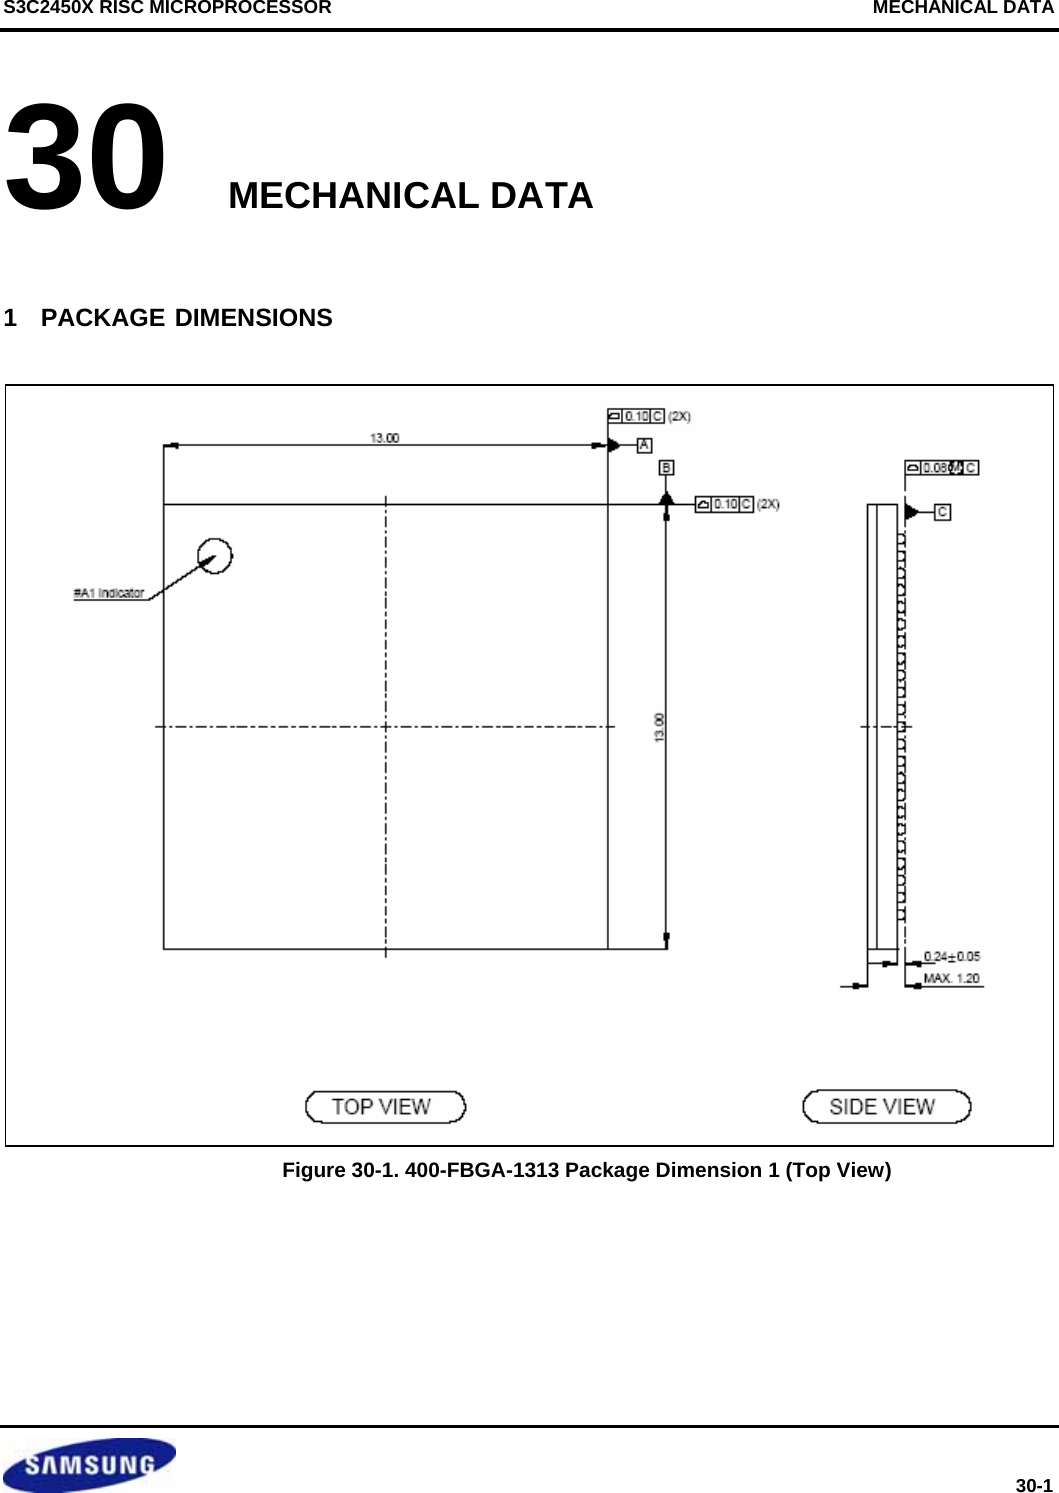 S3C2450X RISC MICROPROCESSOR                                   MECHANICAL DATA    30-1 30 MECHANICAL DATA 1  PACKAGE DIMENSIONS                      Figure 30-1. 400-FBGA-1313 Package Dimension 1 (Top View) 